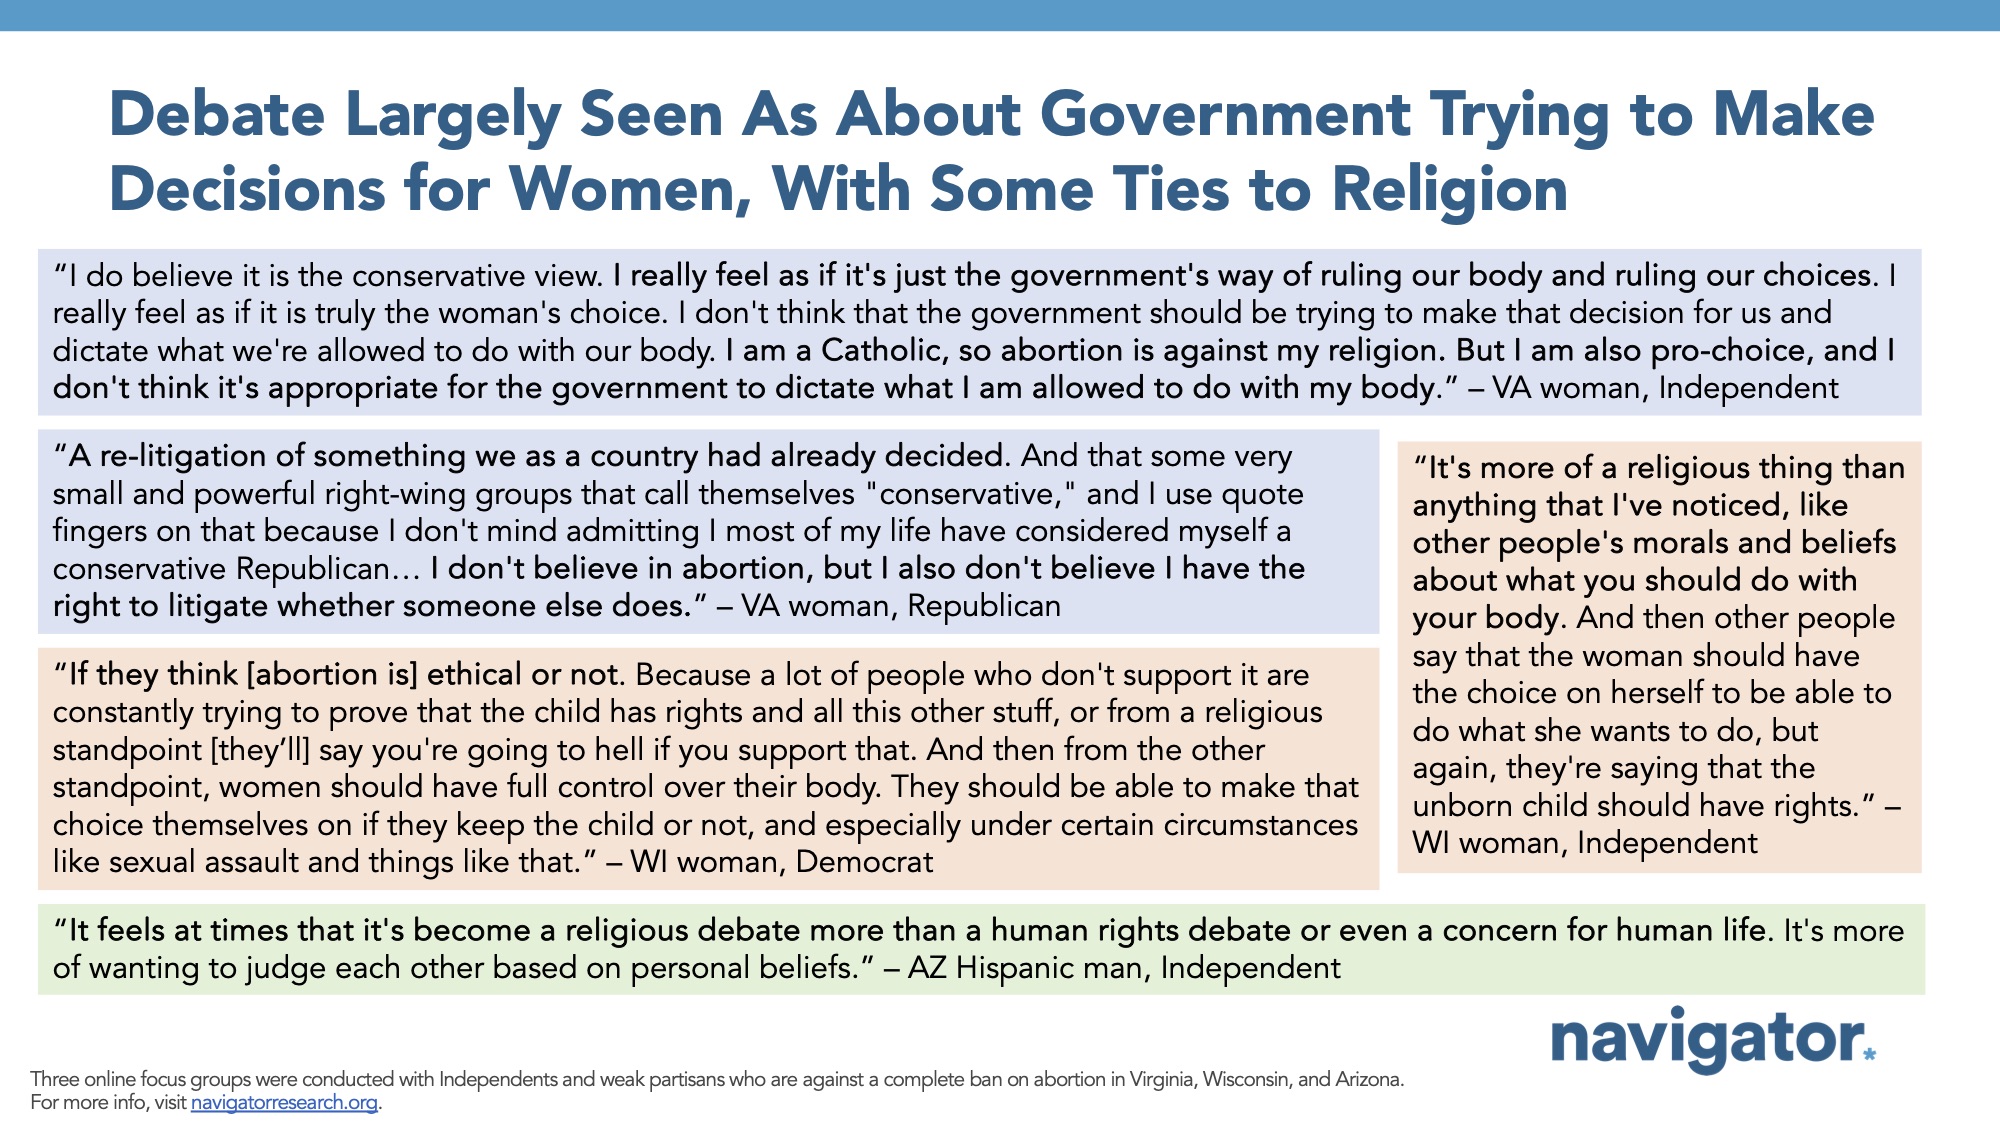 Bar graph of polling data from Navigator Research. Title: Debate Largely Seen As About Government Trying to Make Decisions for Women, With Some Ties to Religion